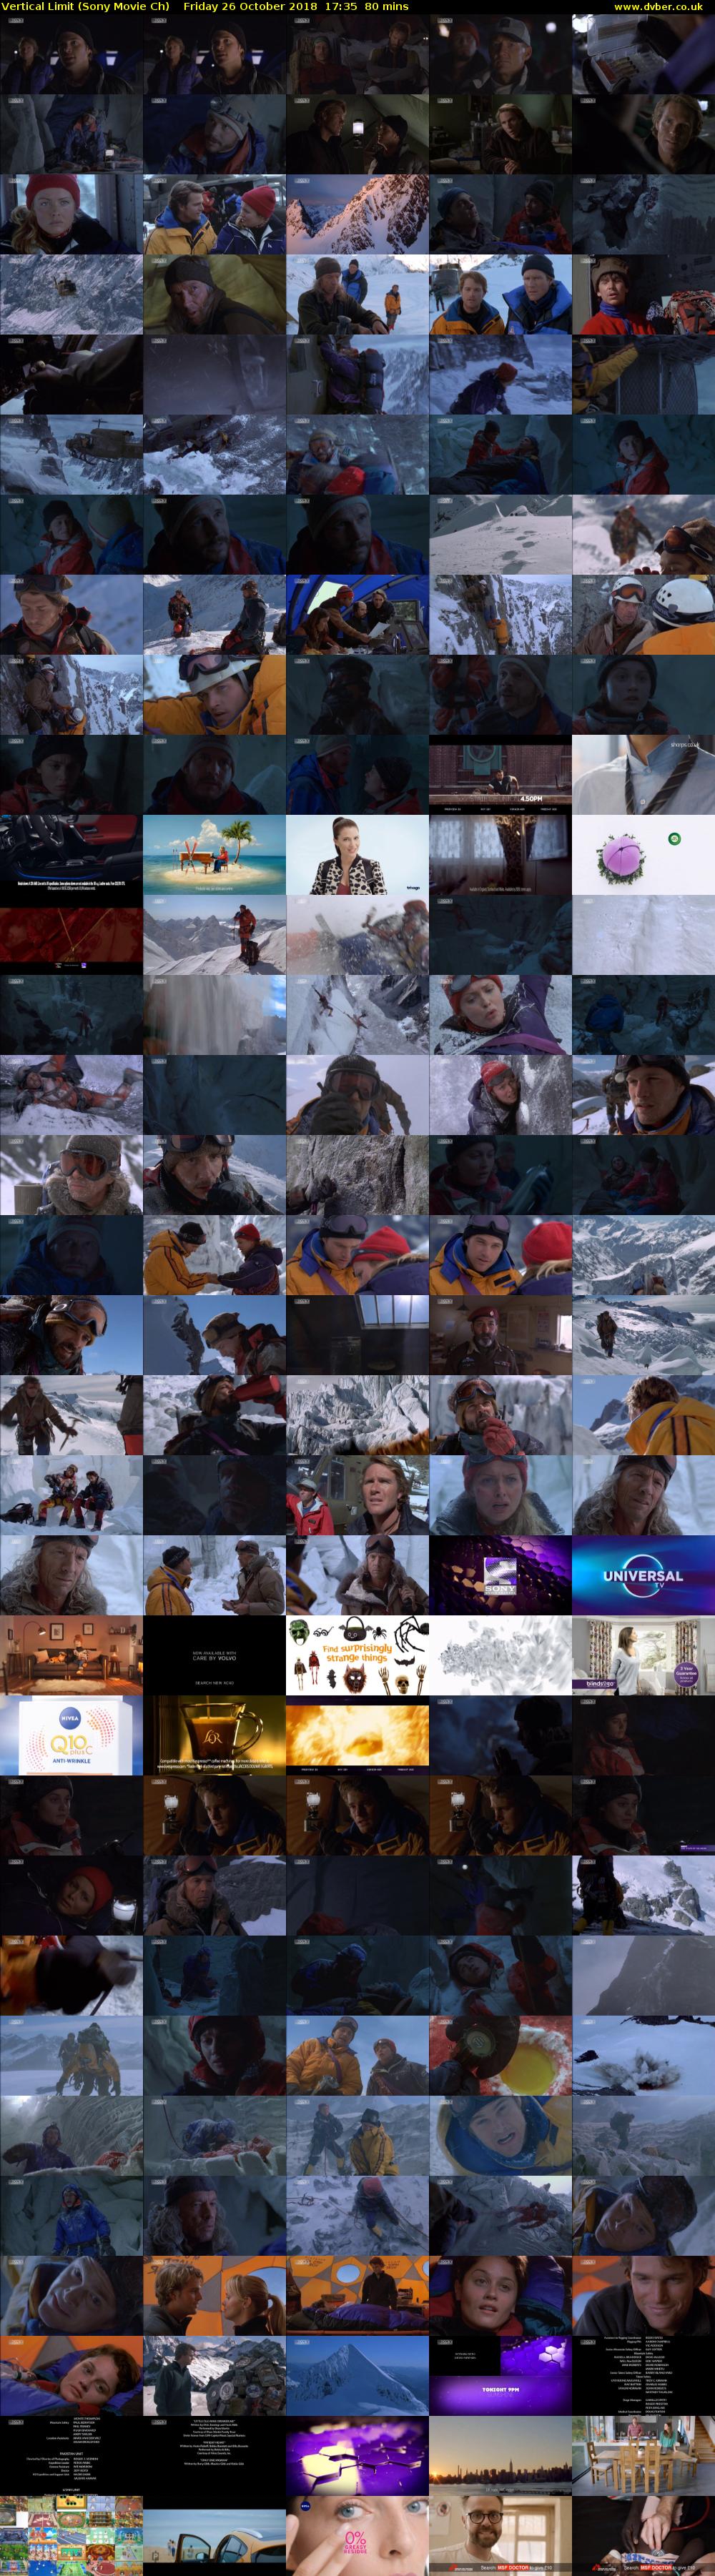 Vertical Limit (Sony Movie Ch) Friday 26 October 2018 17:35 - 18:55